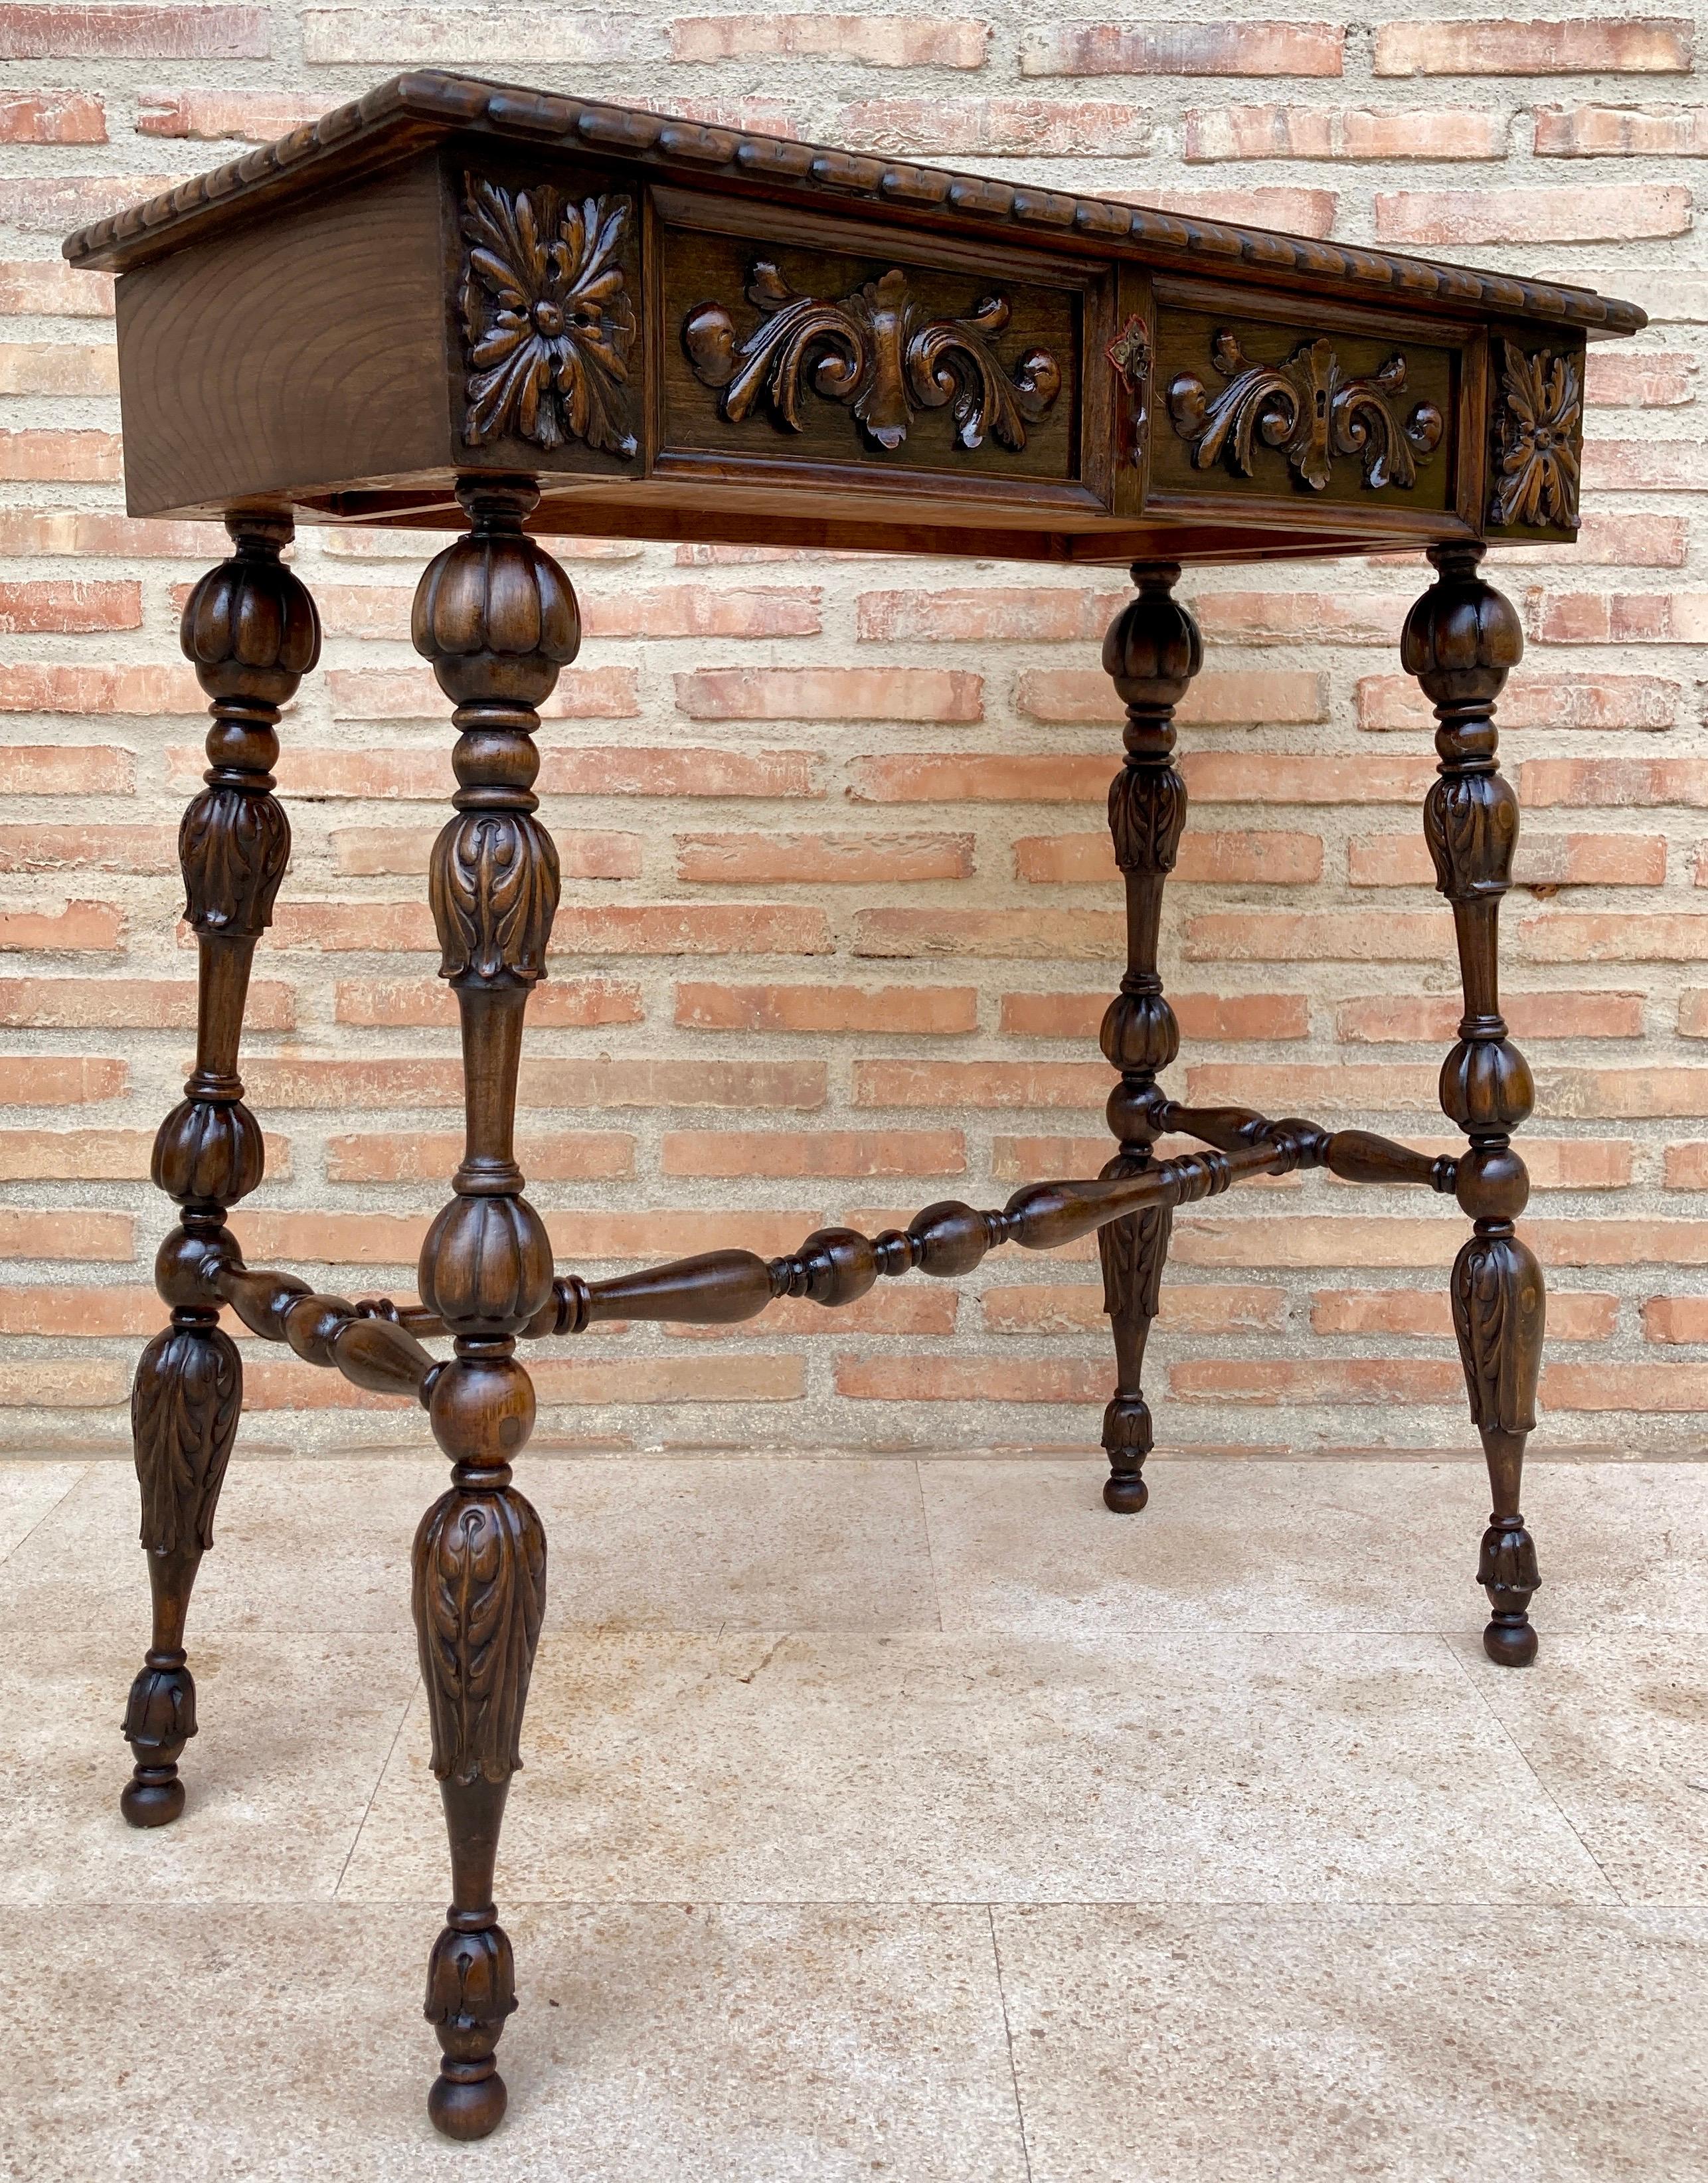 Early 20Th Century Carved Oak Table, Side Table or Console Table.
Table, side table or console table with a carved oak drawer from the early 20th century.
Beautiful Spanish oak wood table, carved and with a central drawer that has a single iron